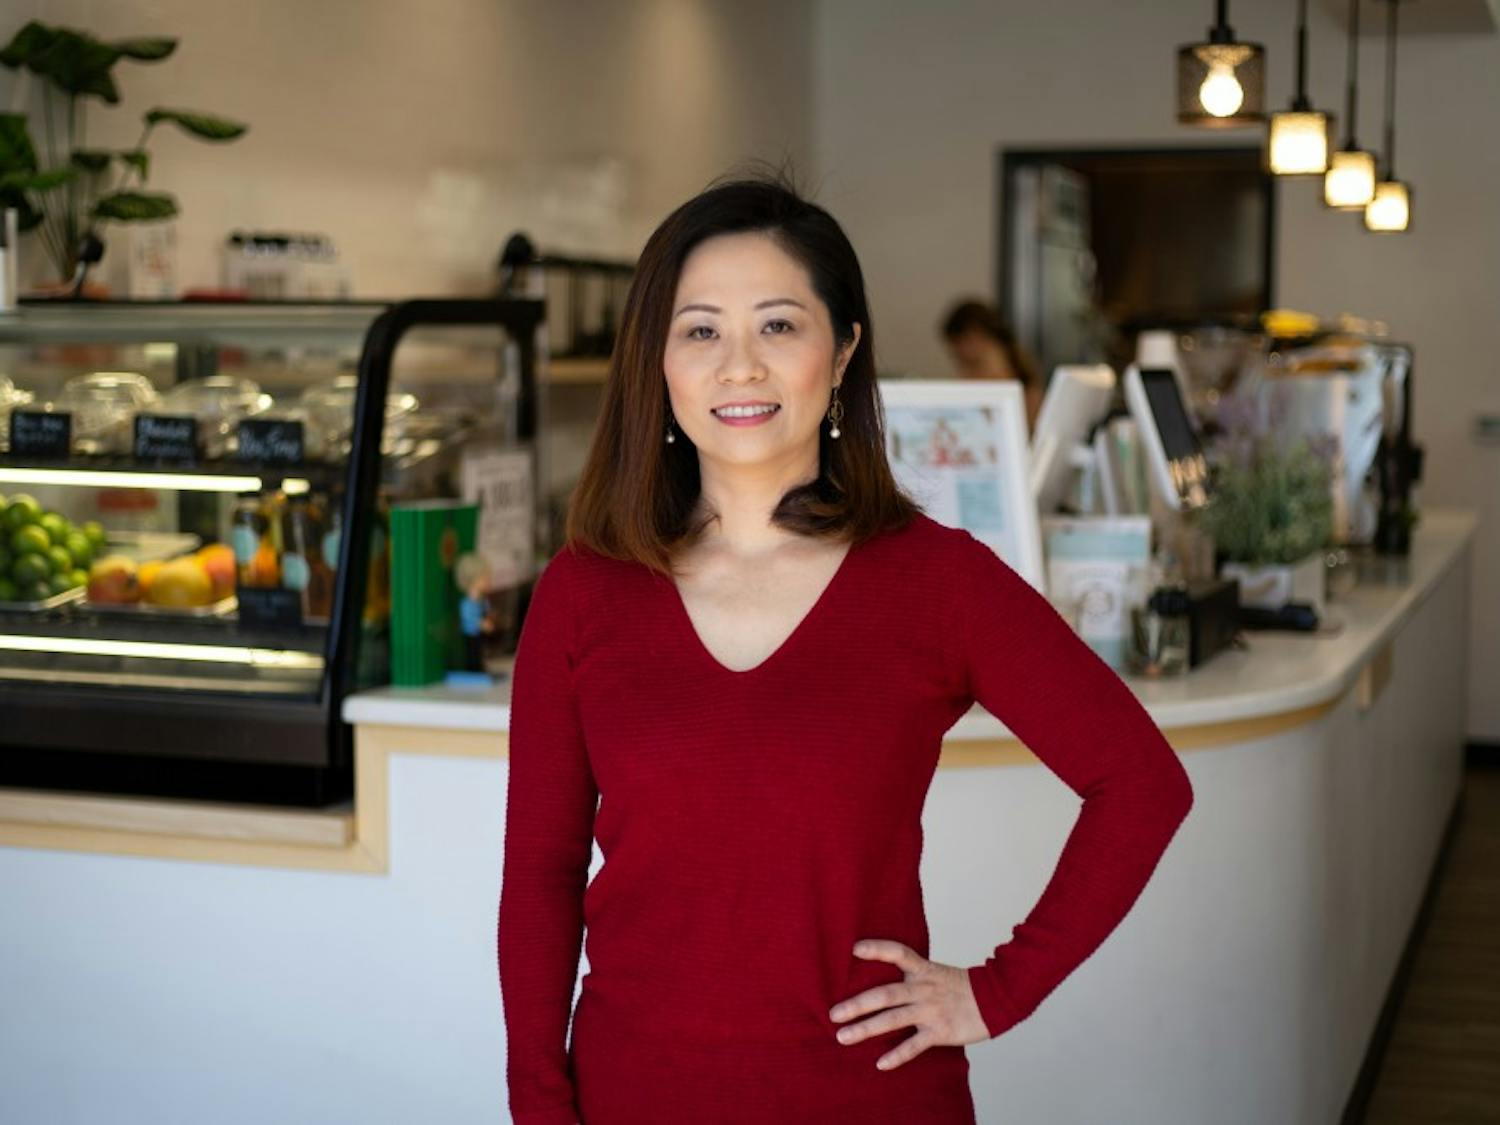 Julia Chiu (Ya Huei) is co-owner of Cha House, a tea house on Franklin Street that she opened with her sister in April of 2018.